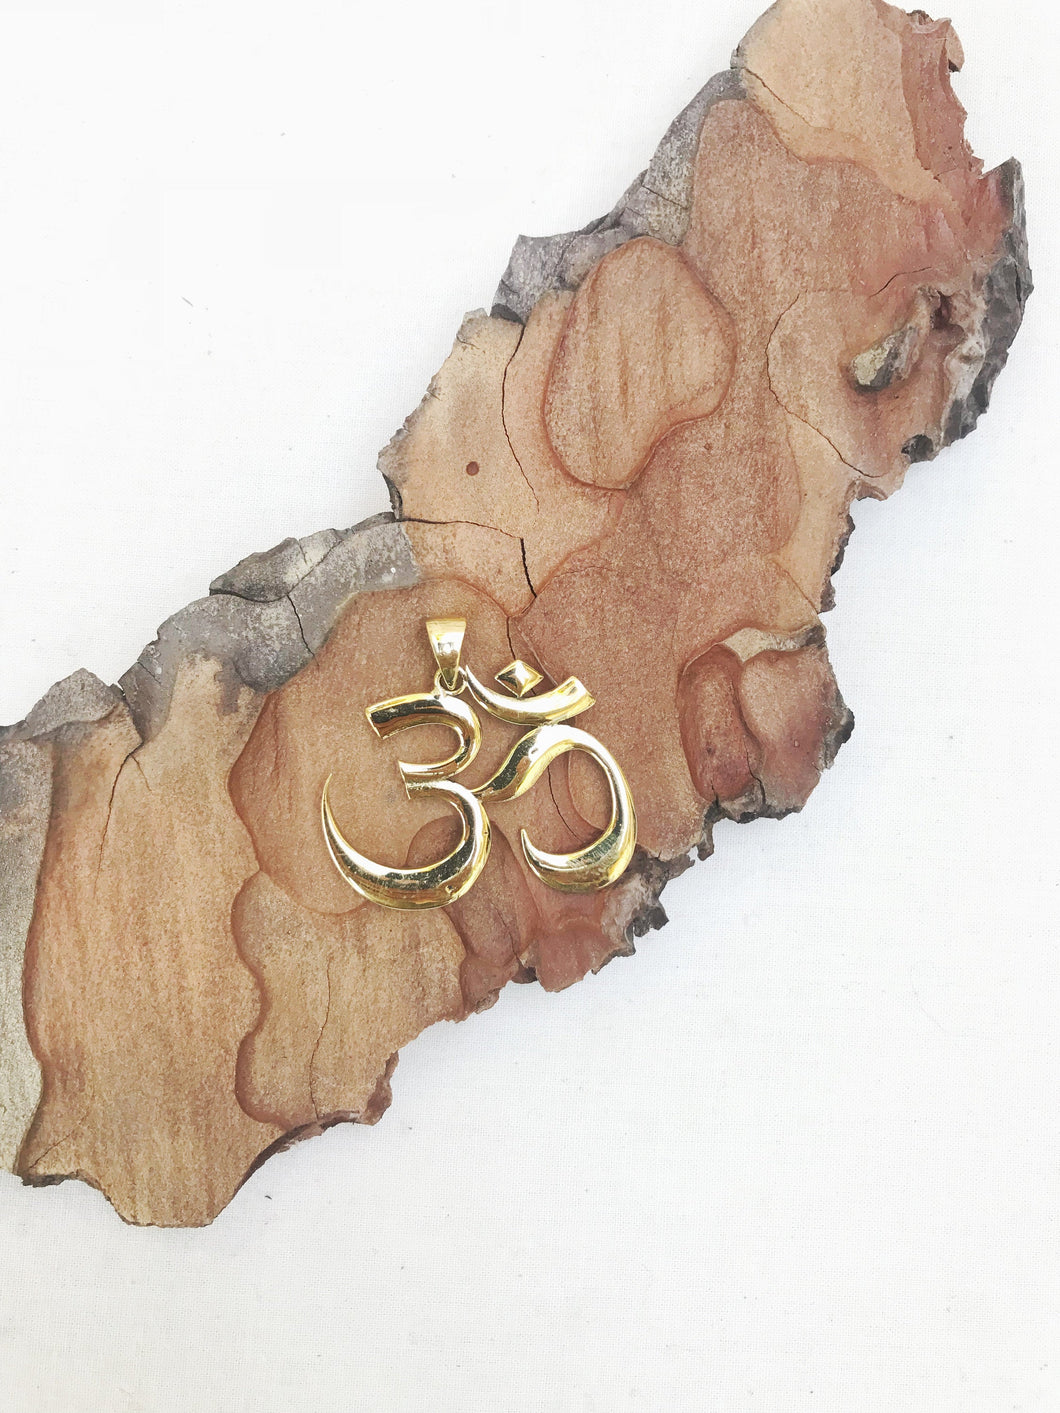 OM Yoga Pendant Necklace |  With or Without Chain